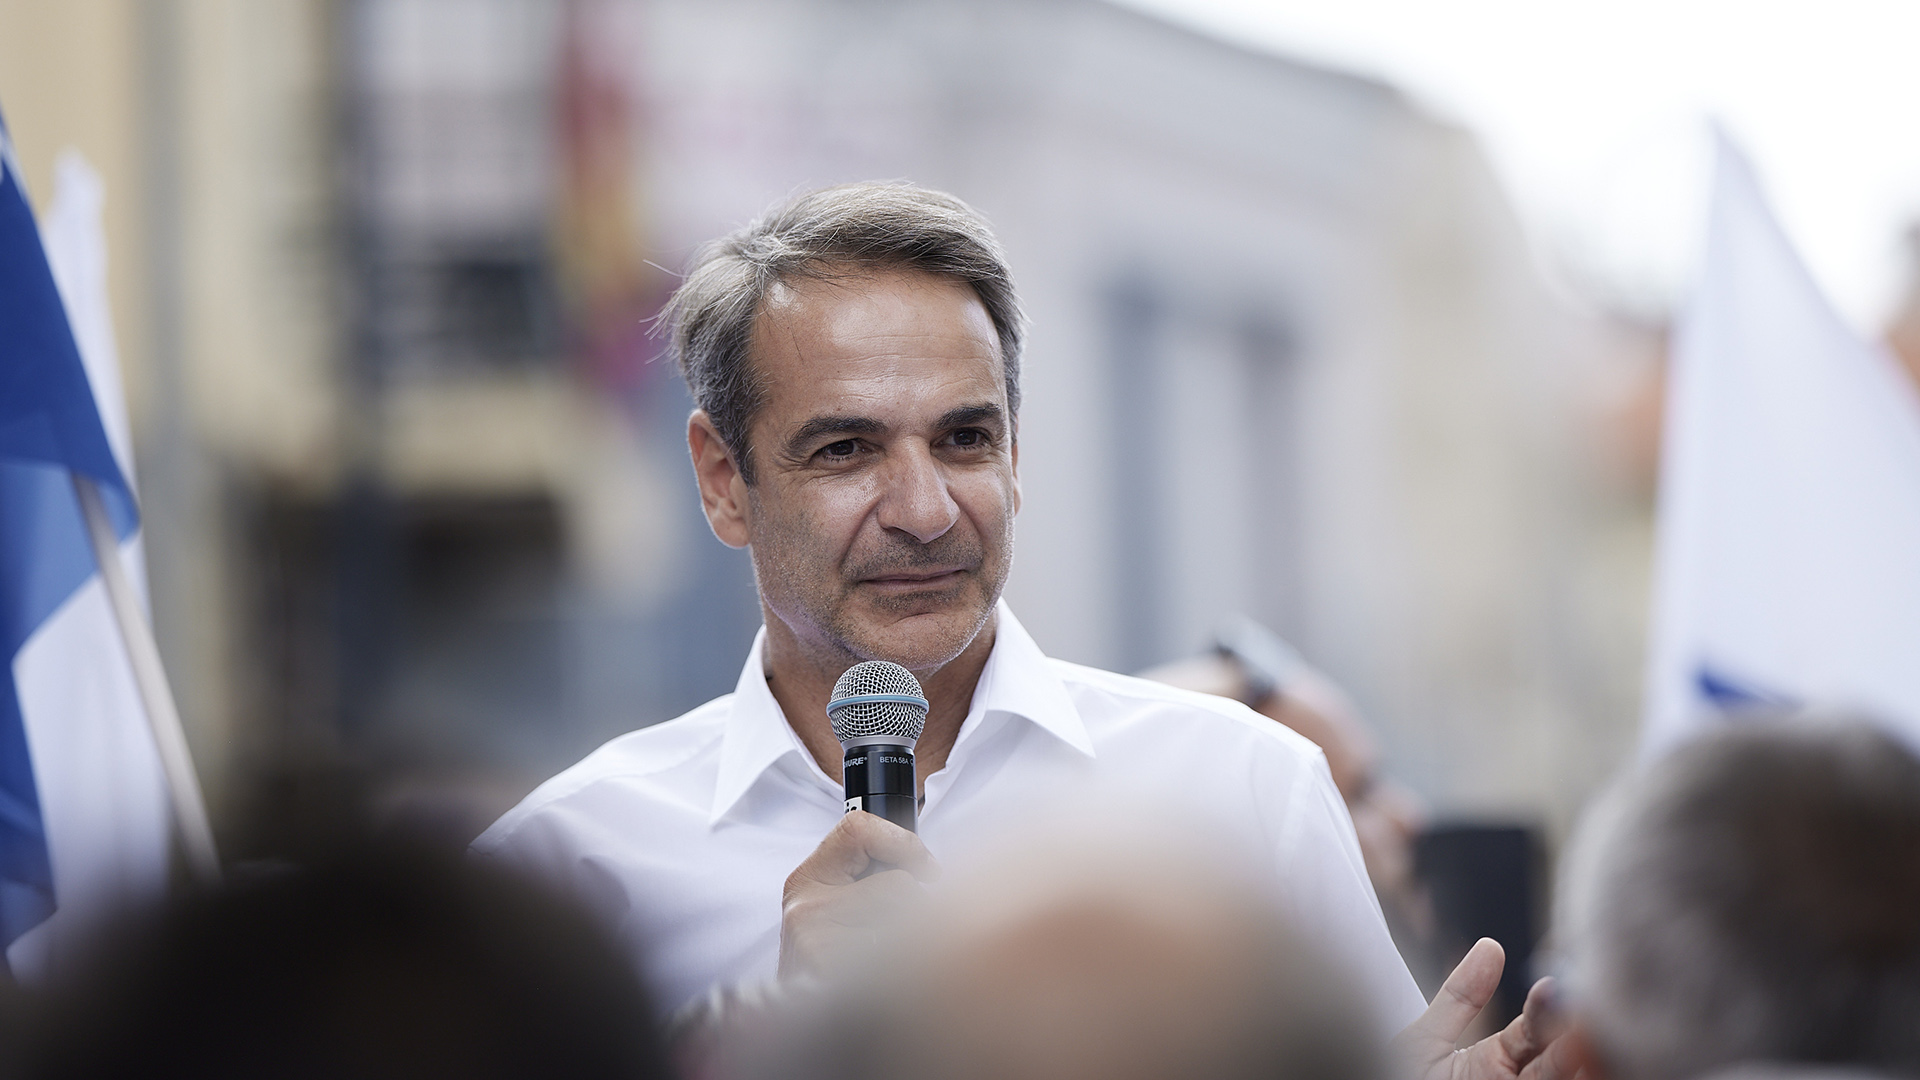 PM Mitsotakis sends message to North Macedonia from Thessaloniki image